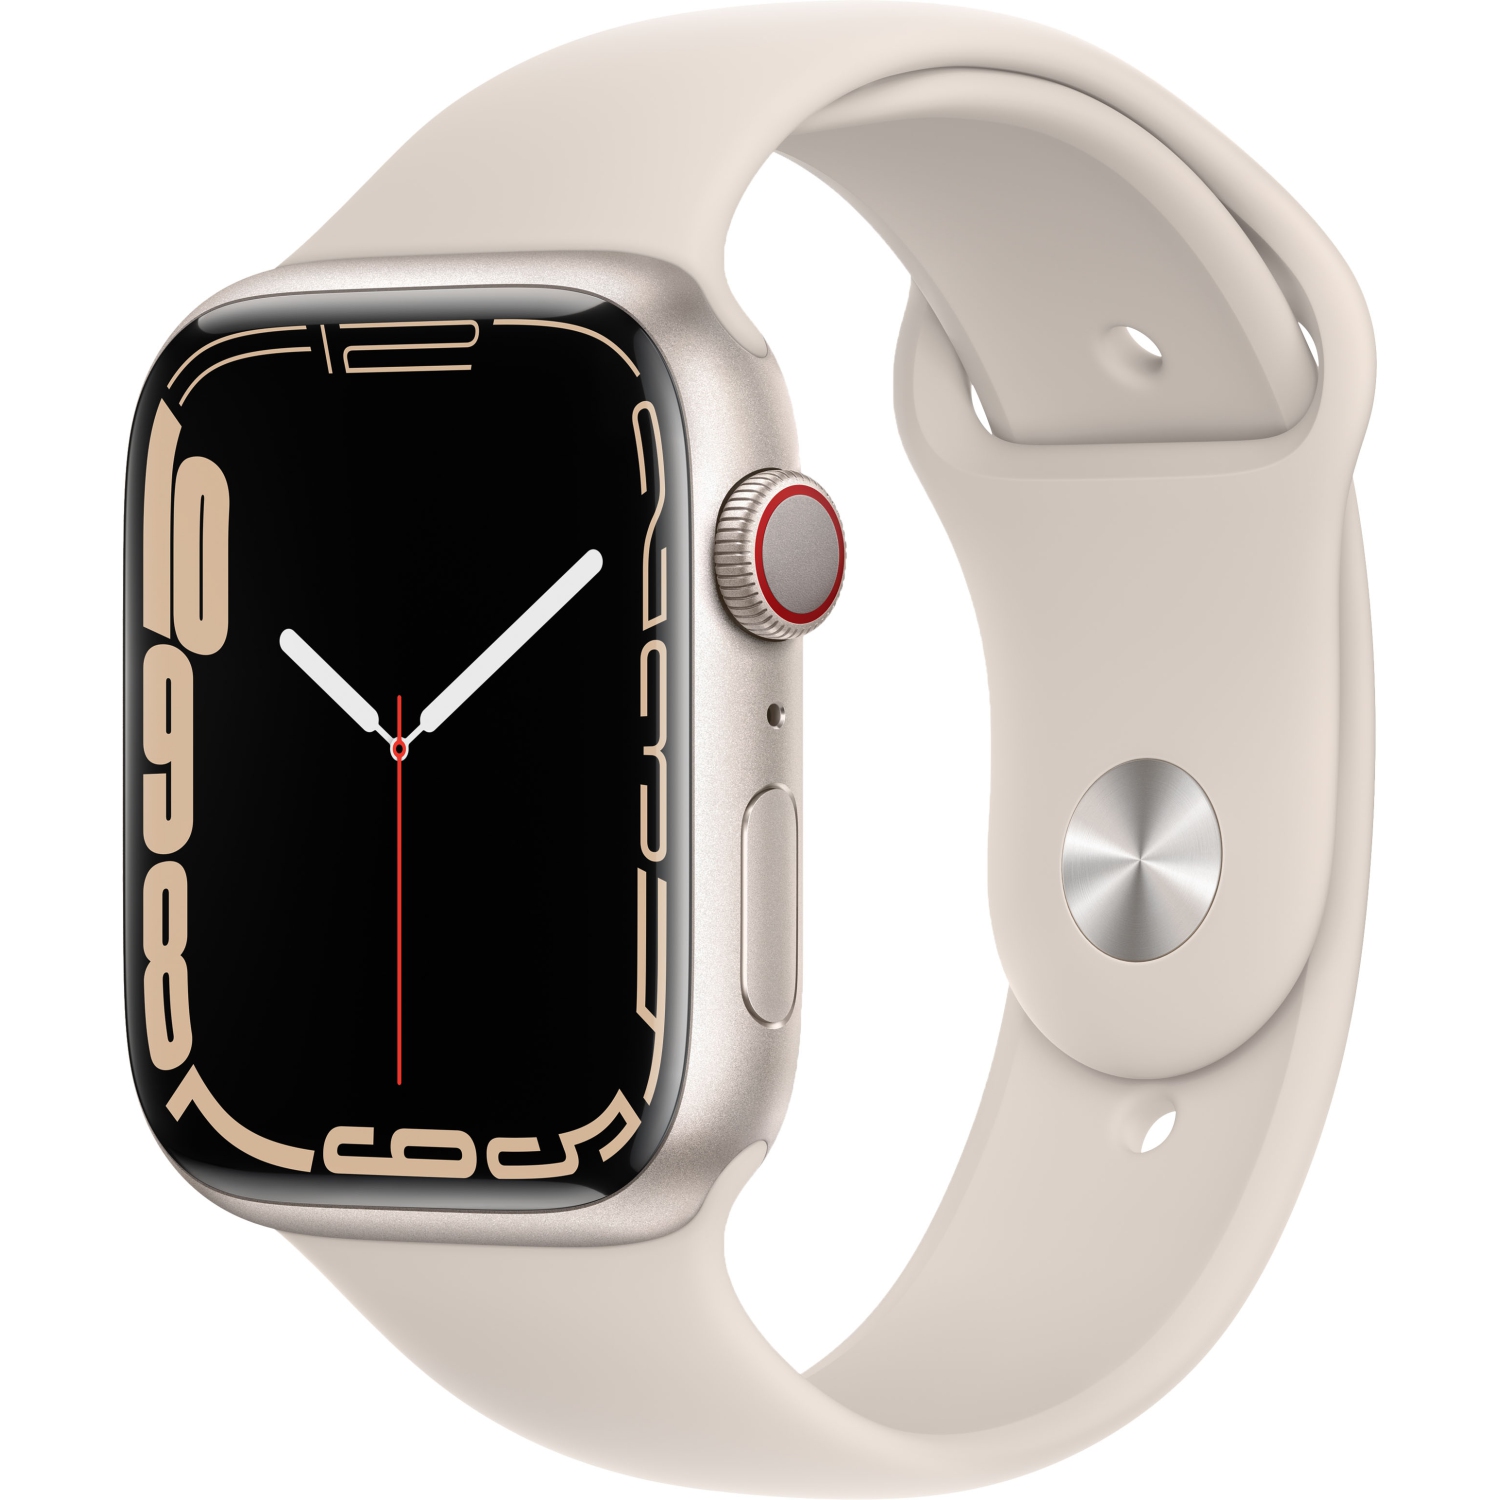 Refurbished (Good) - Apple Watch Series 7 (GPS + Cellular) 45mm Starlight Aluminum Case with Starlight Sport Band